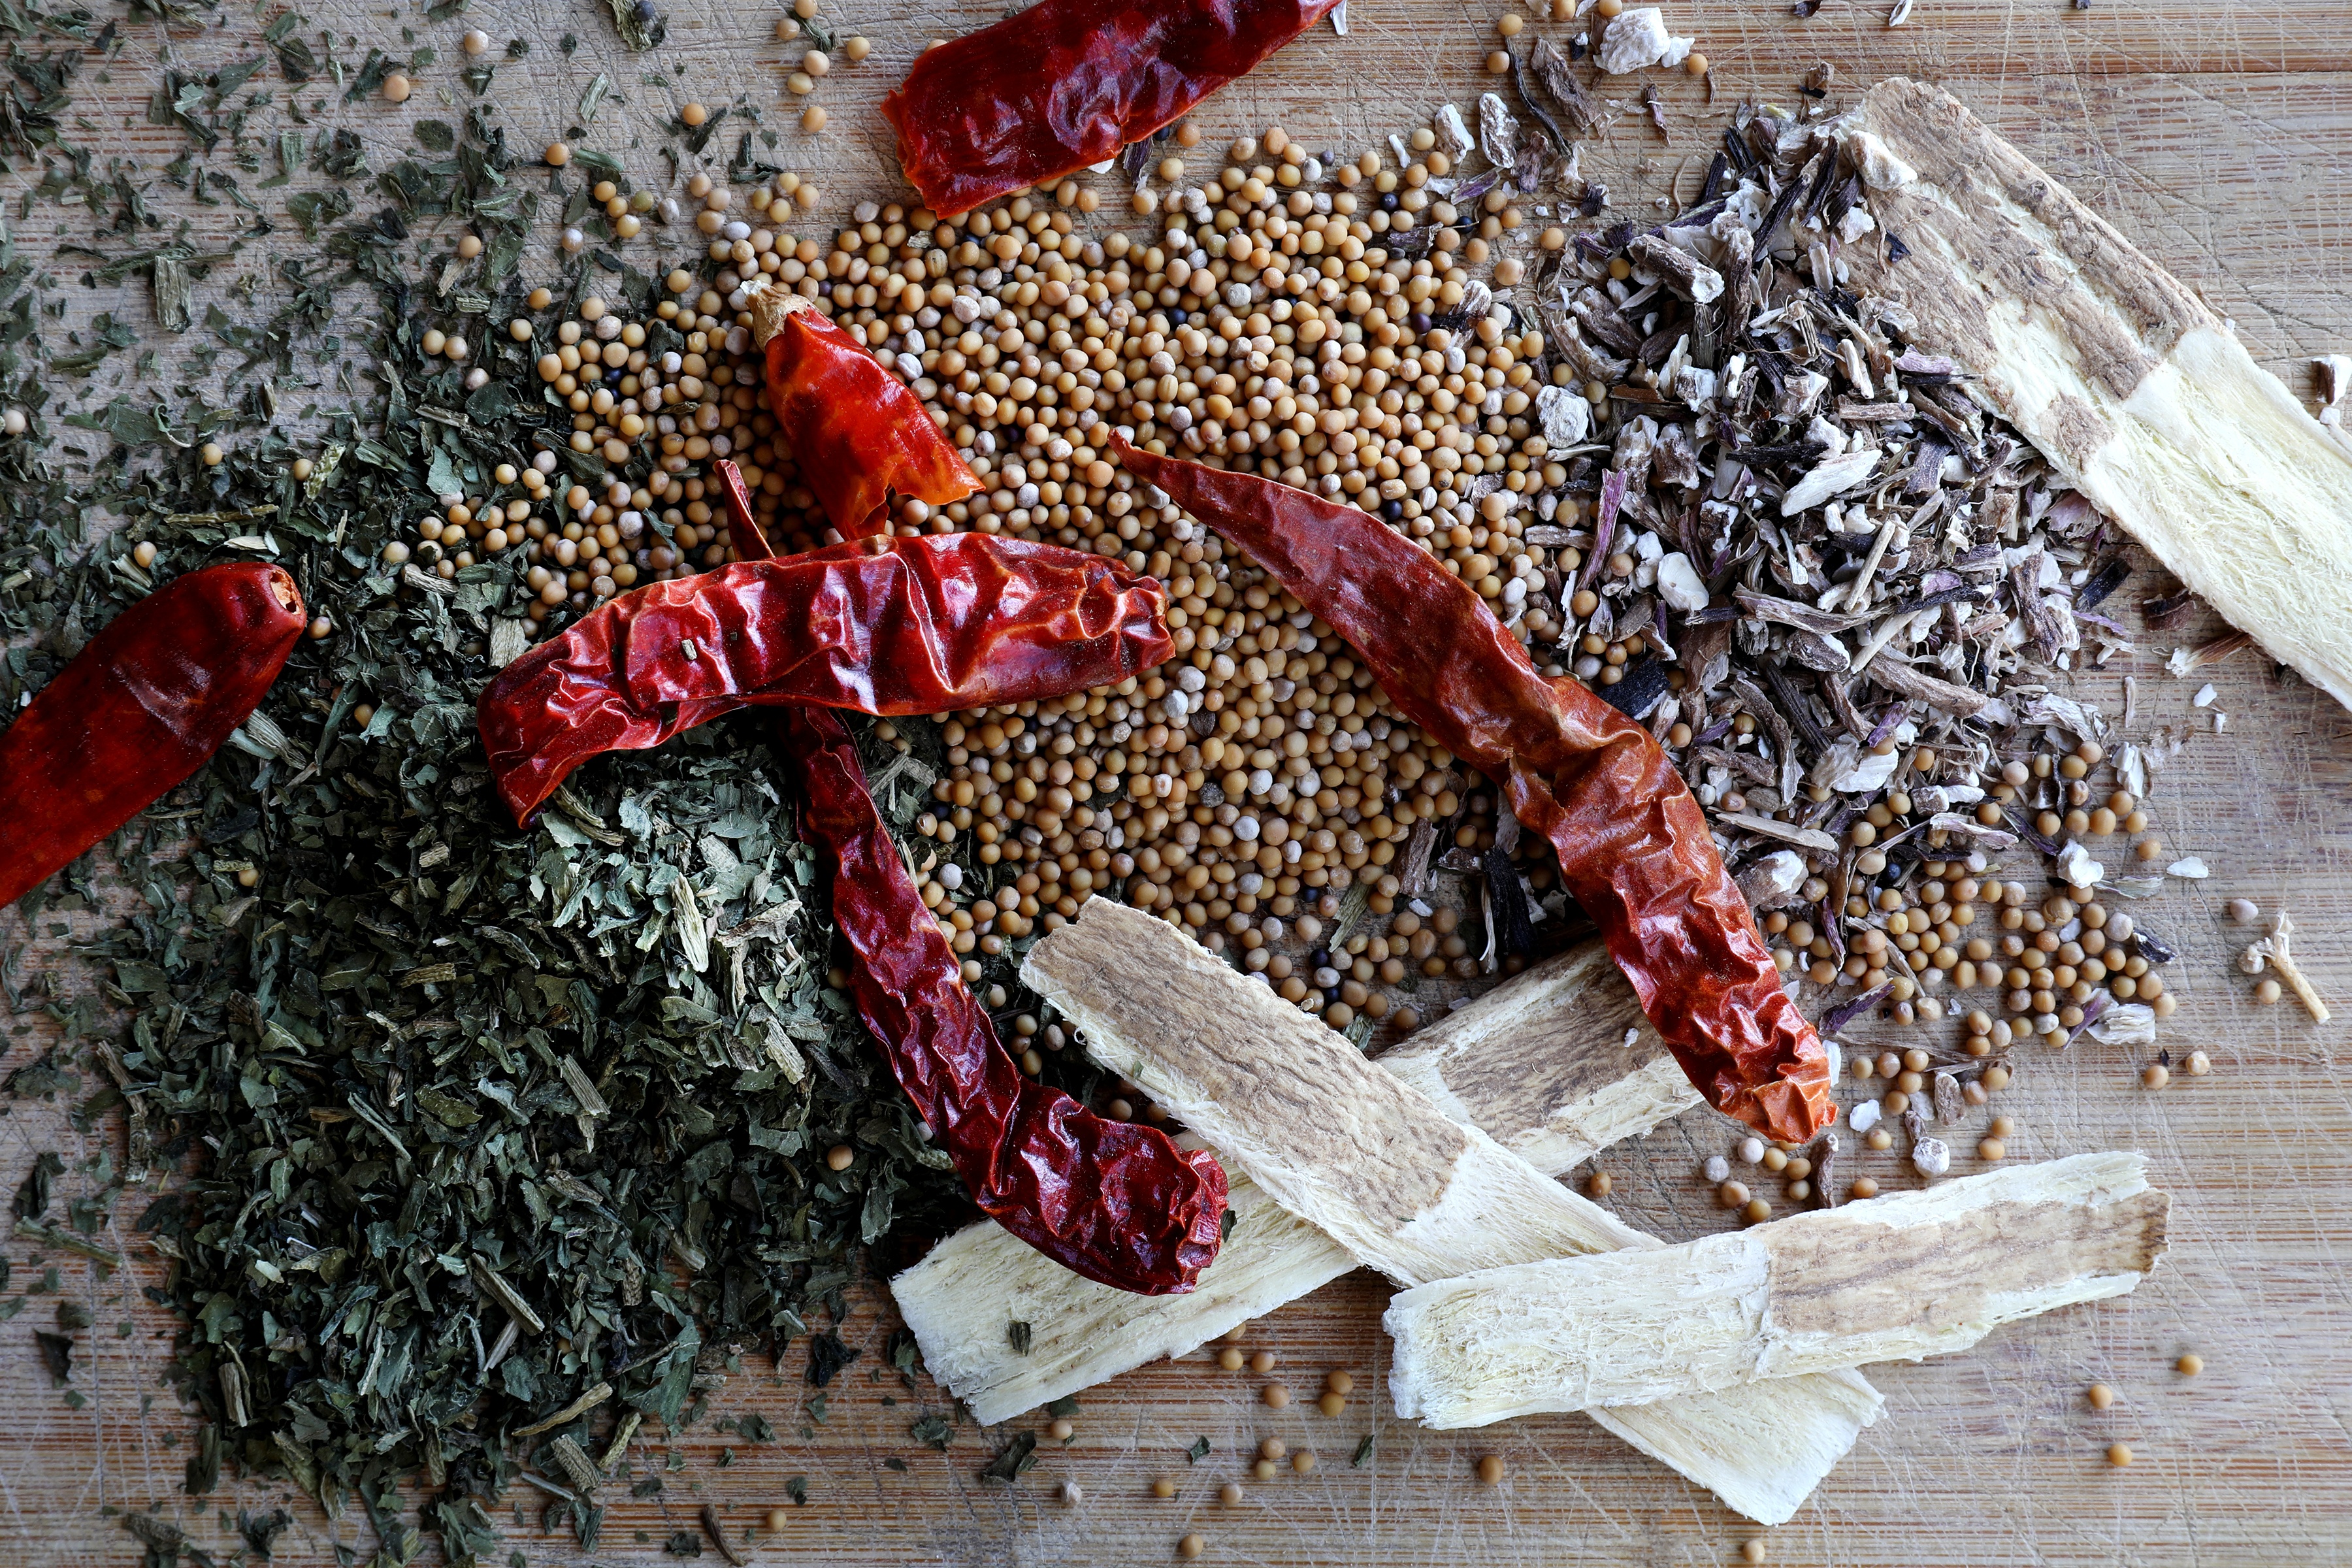 Vibrant colorful herbs, spices, and barks displayed on wood